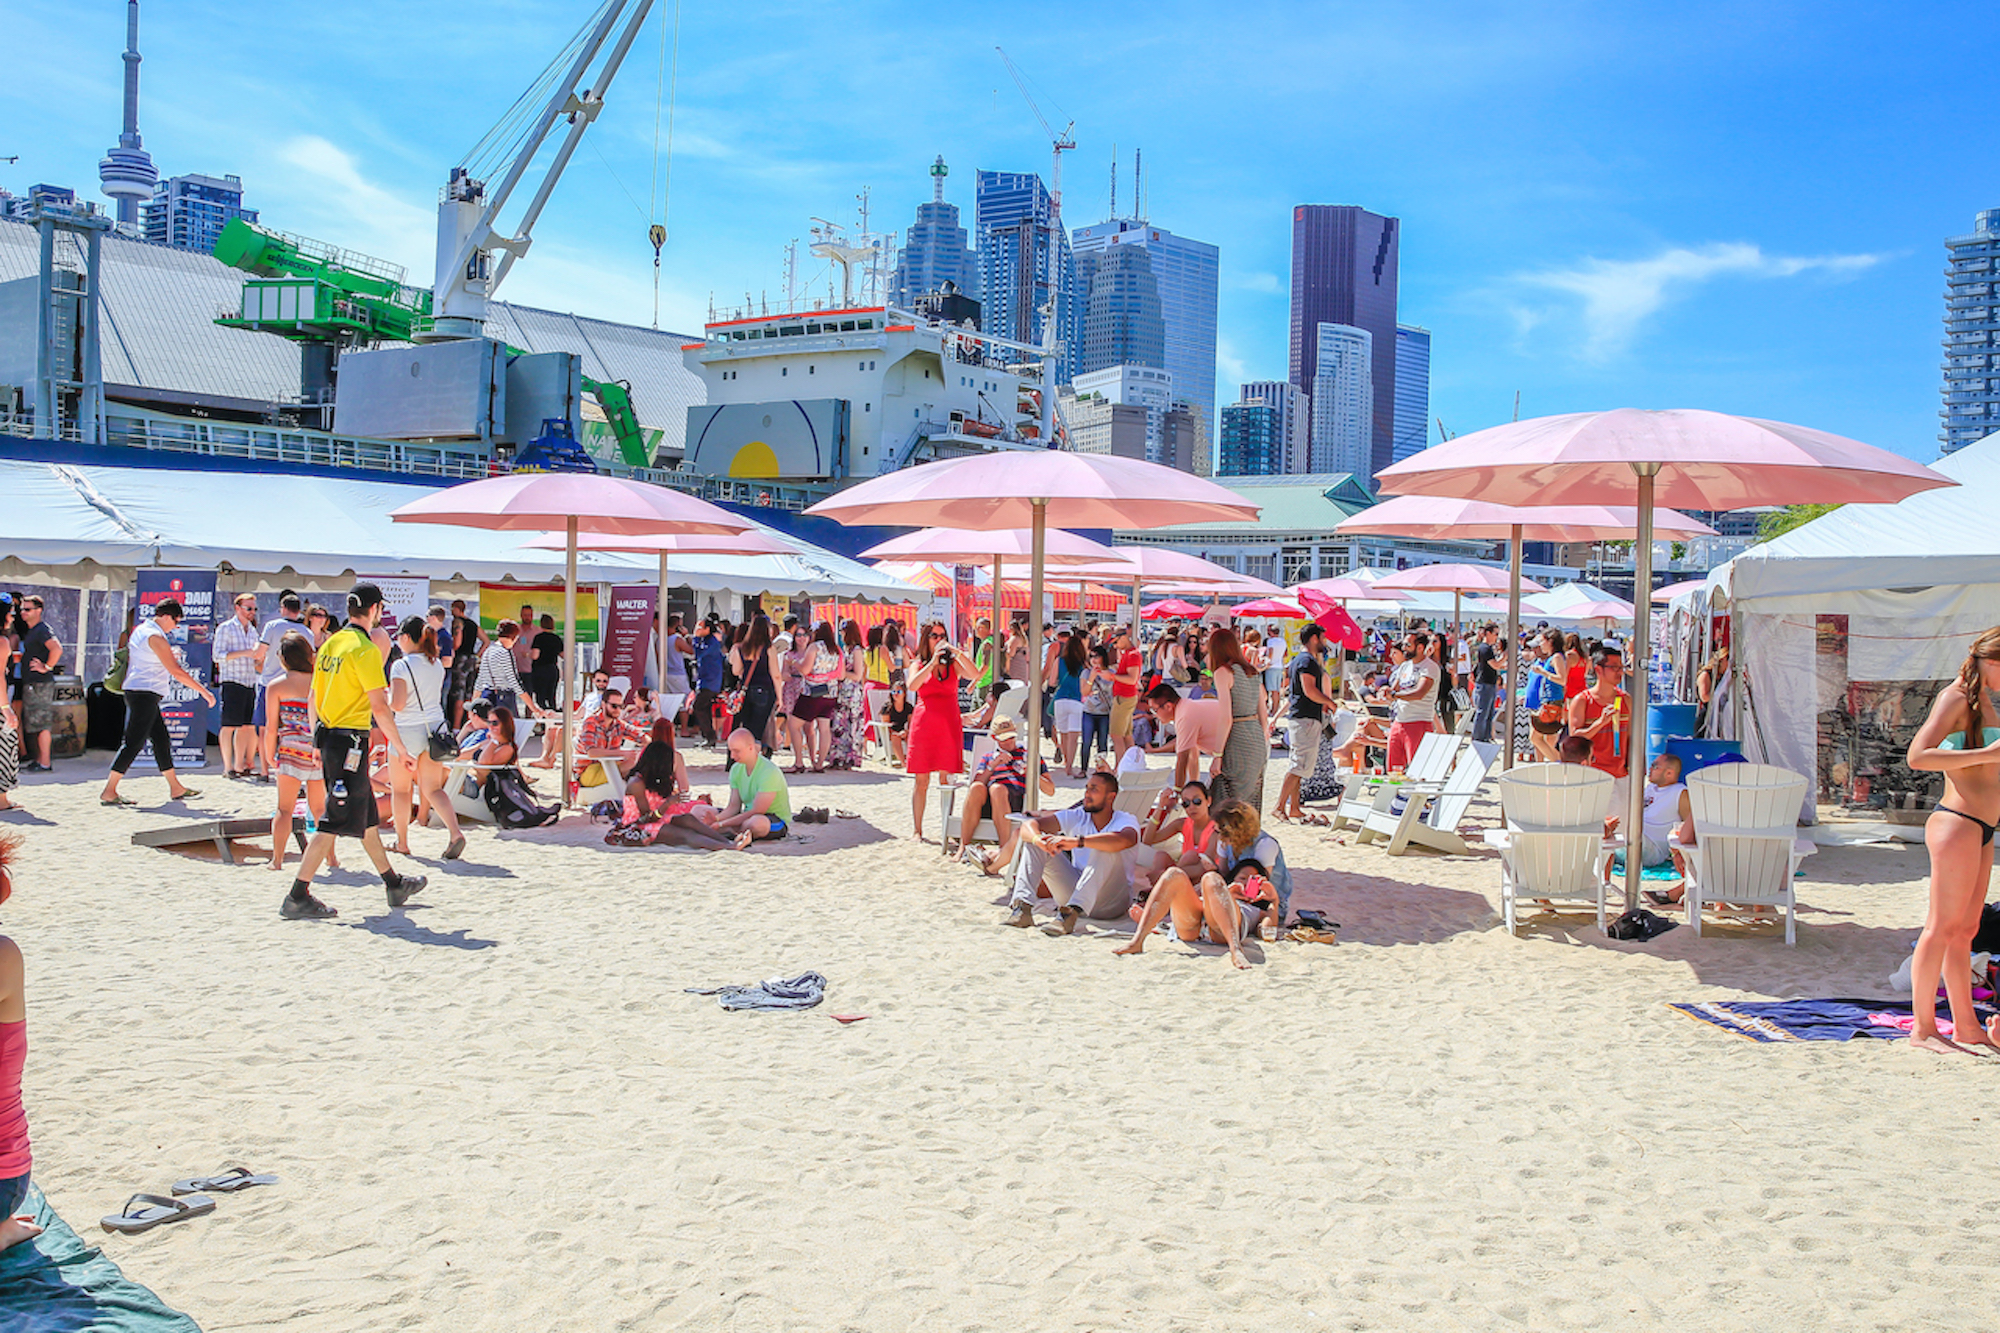 groups of people enjoying a summer day at a festival on a sandy beach with pink umbrellas